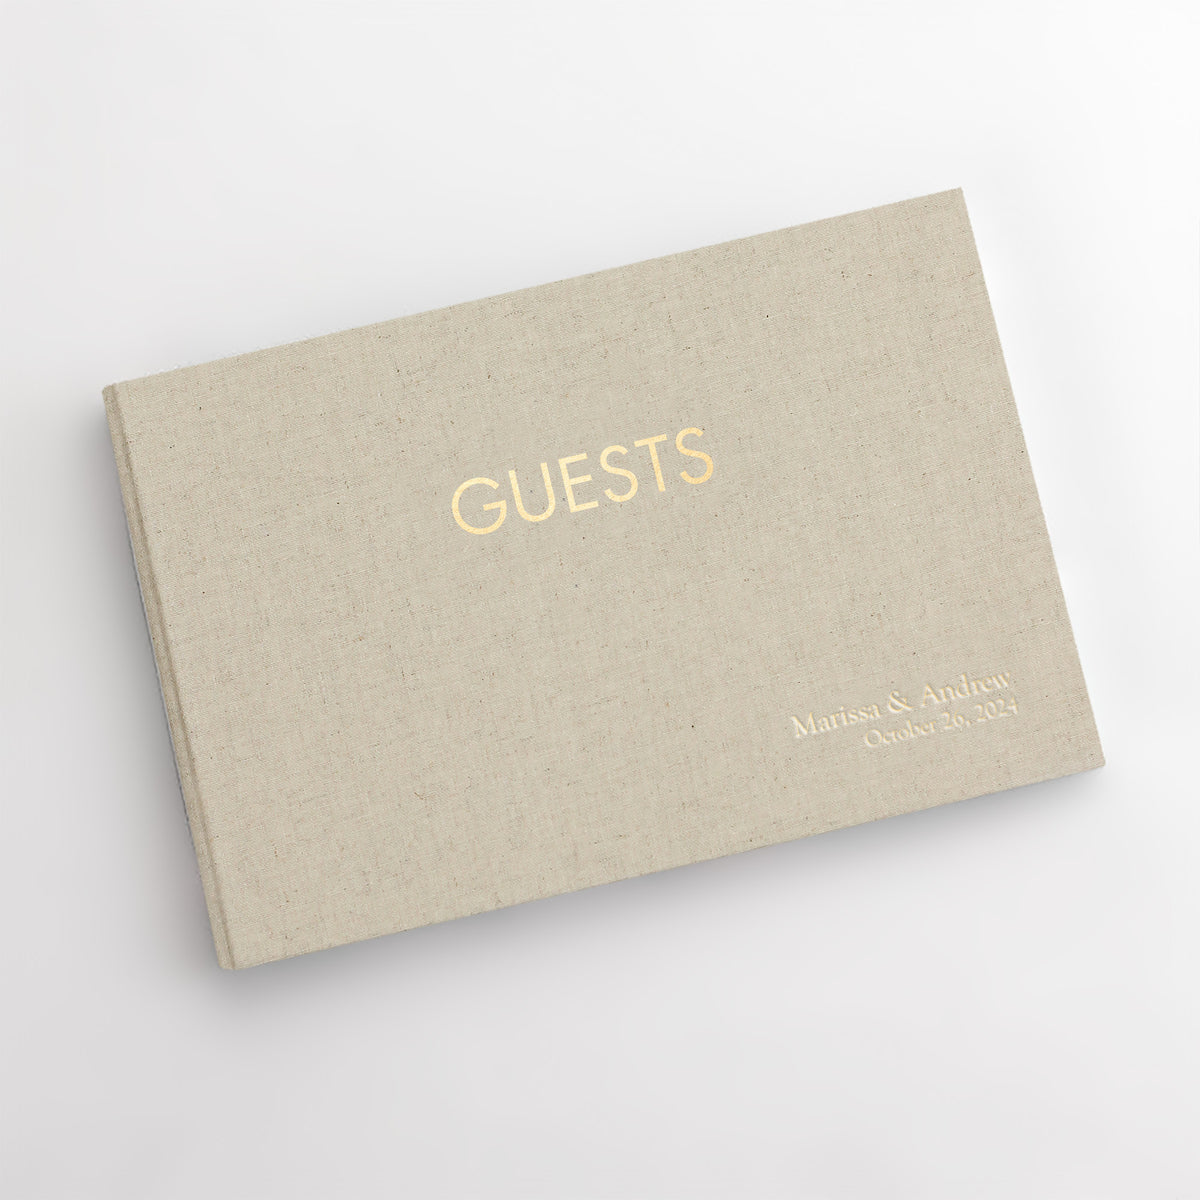 Guestbook Embossed with “Guests” with Natural Linen Cover